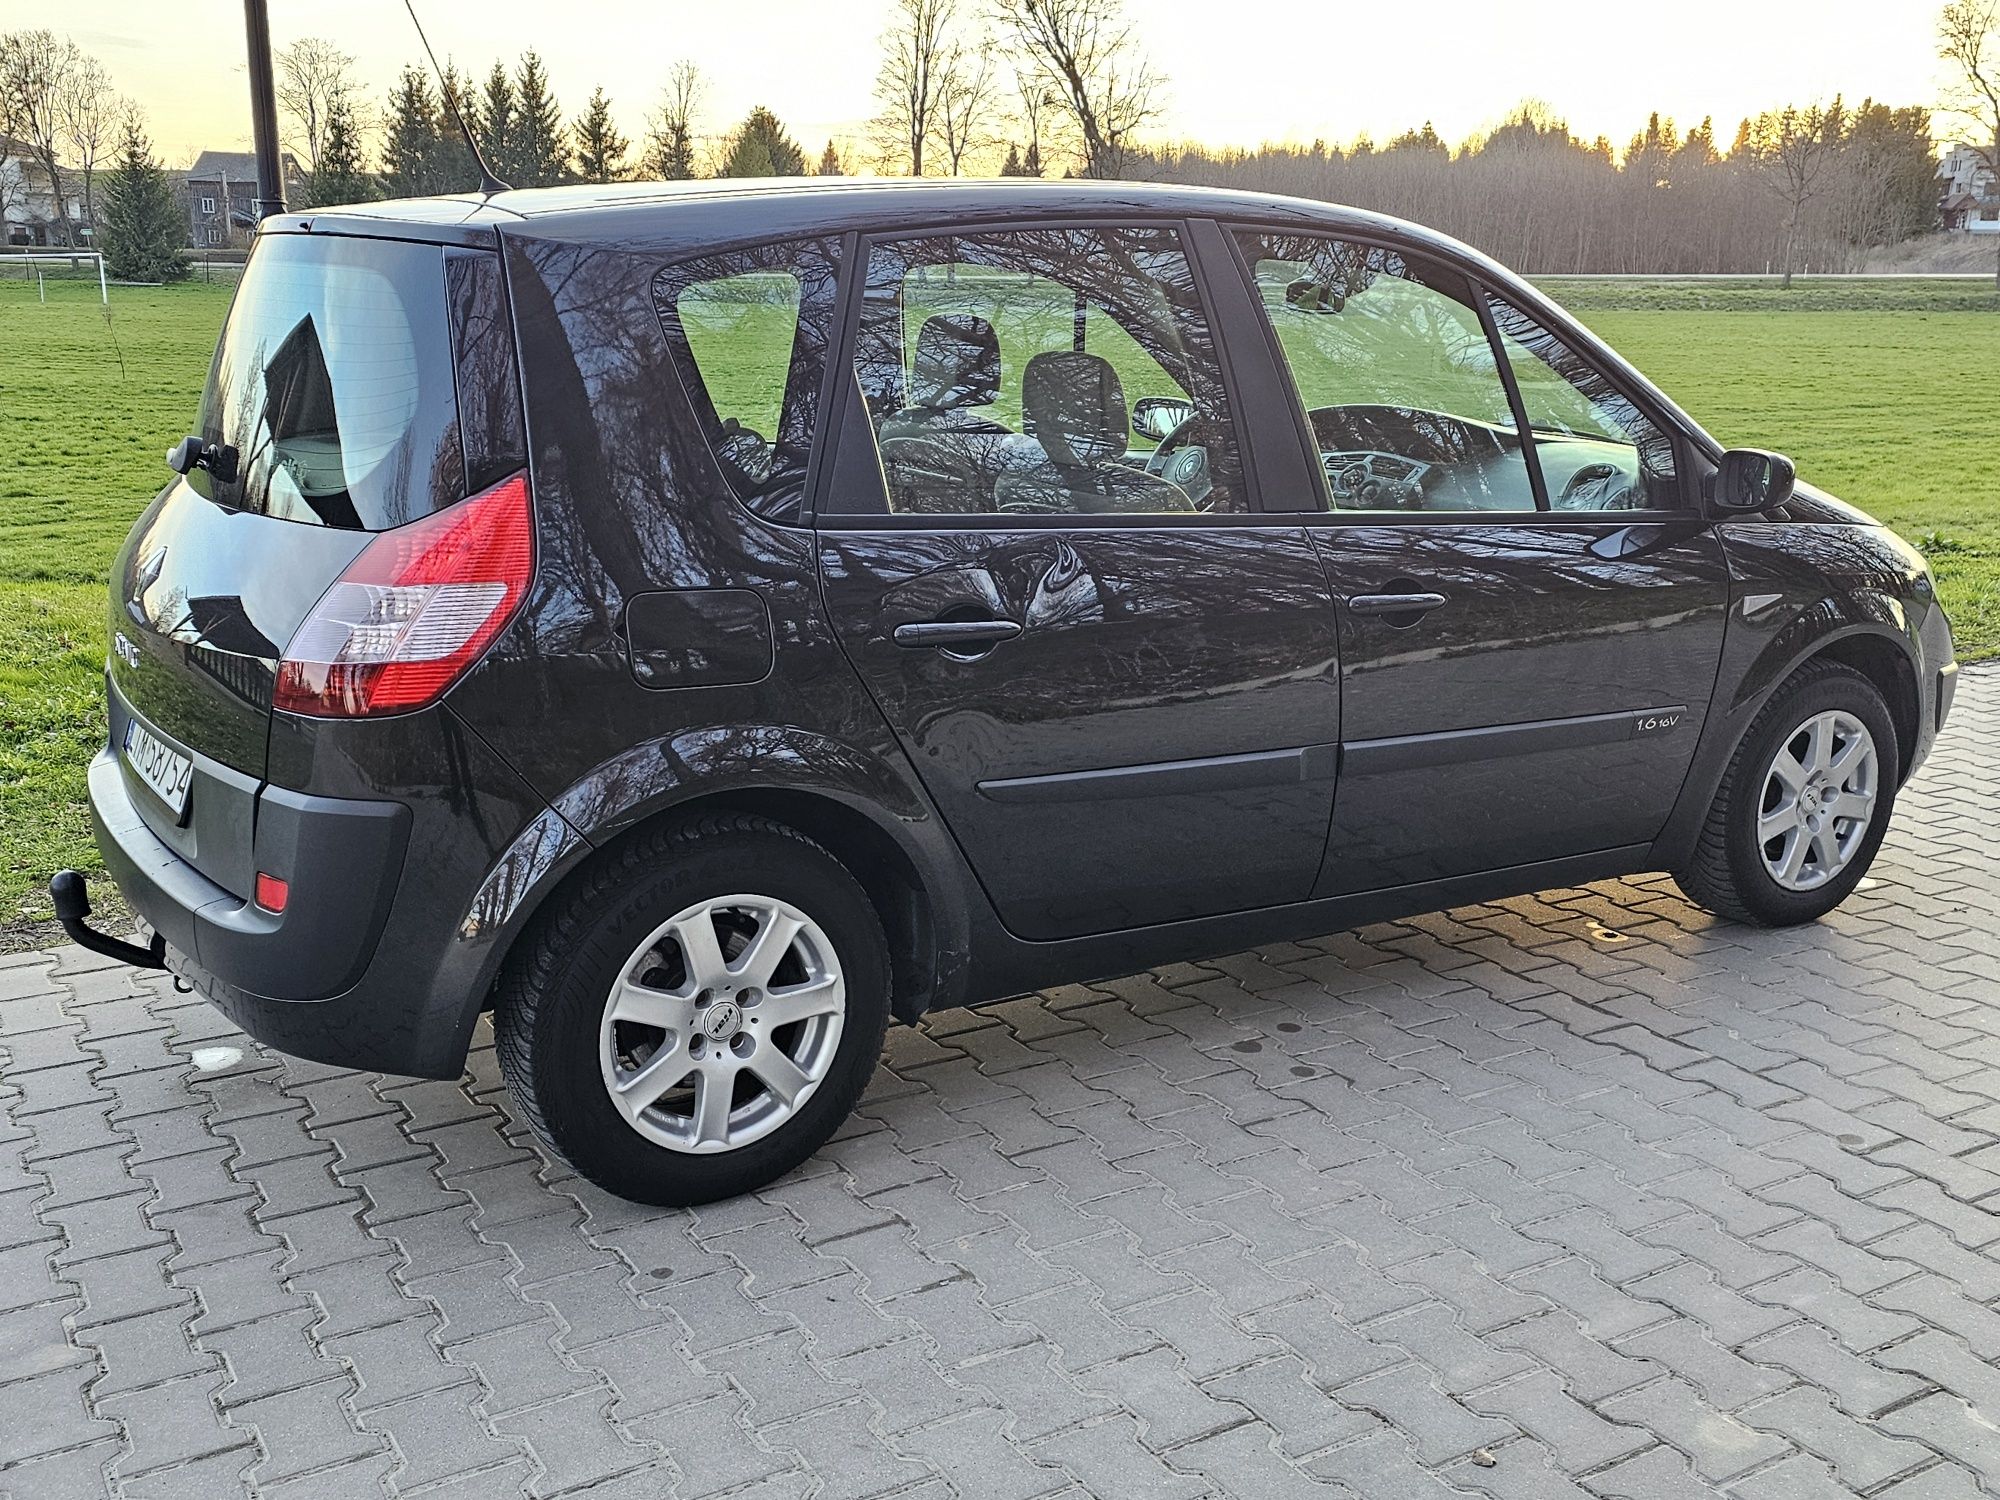 Renault Scenic 1.6 benzyna 2004r